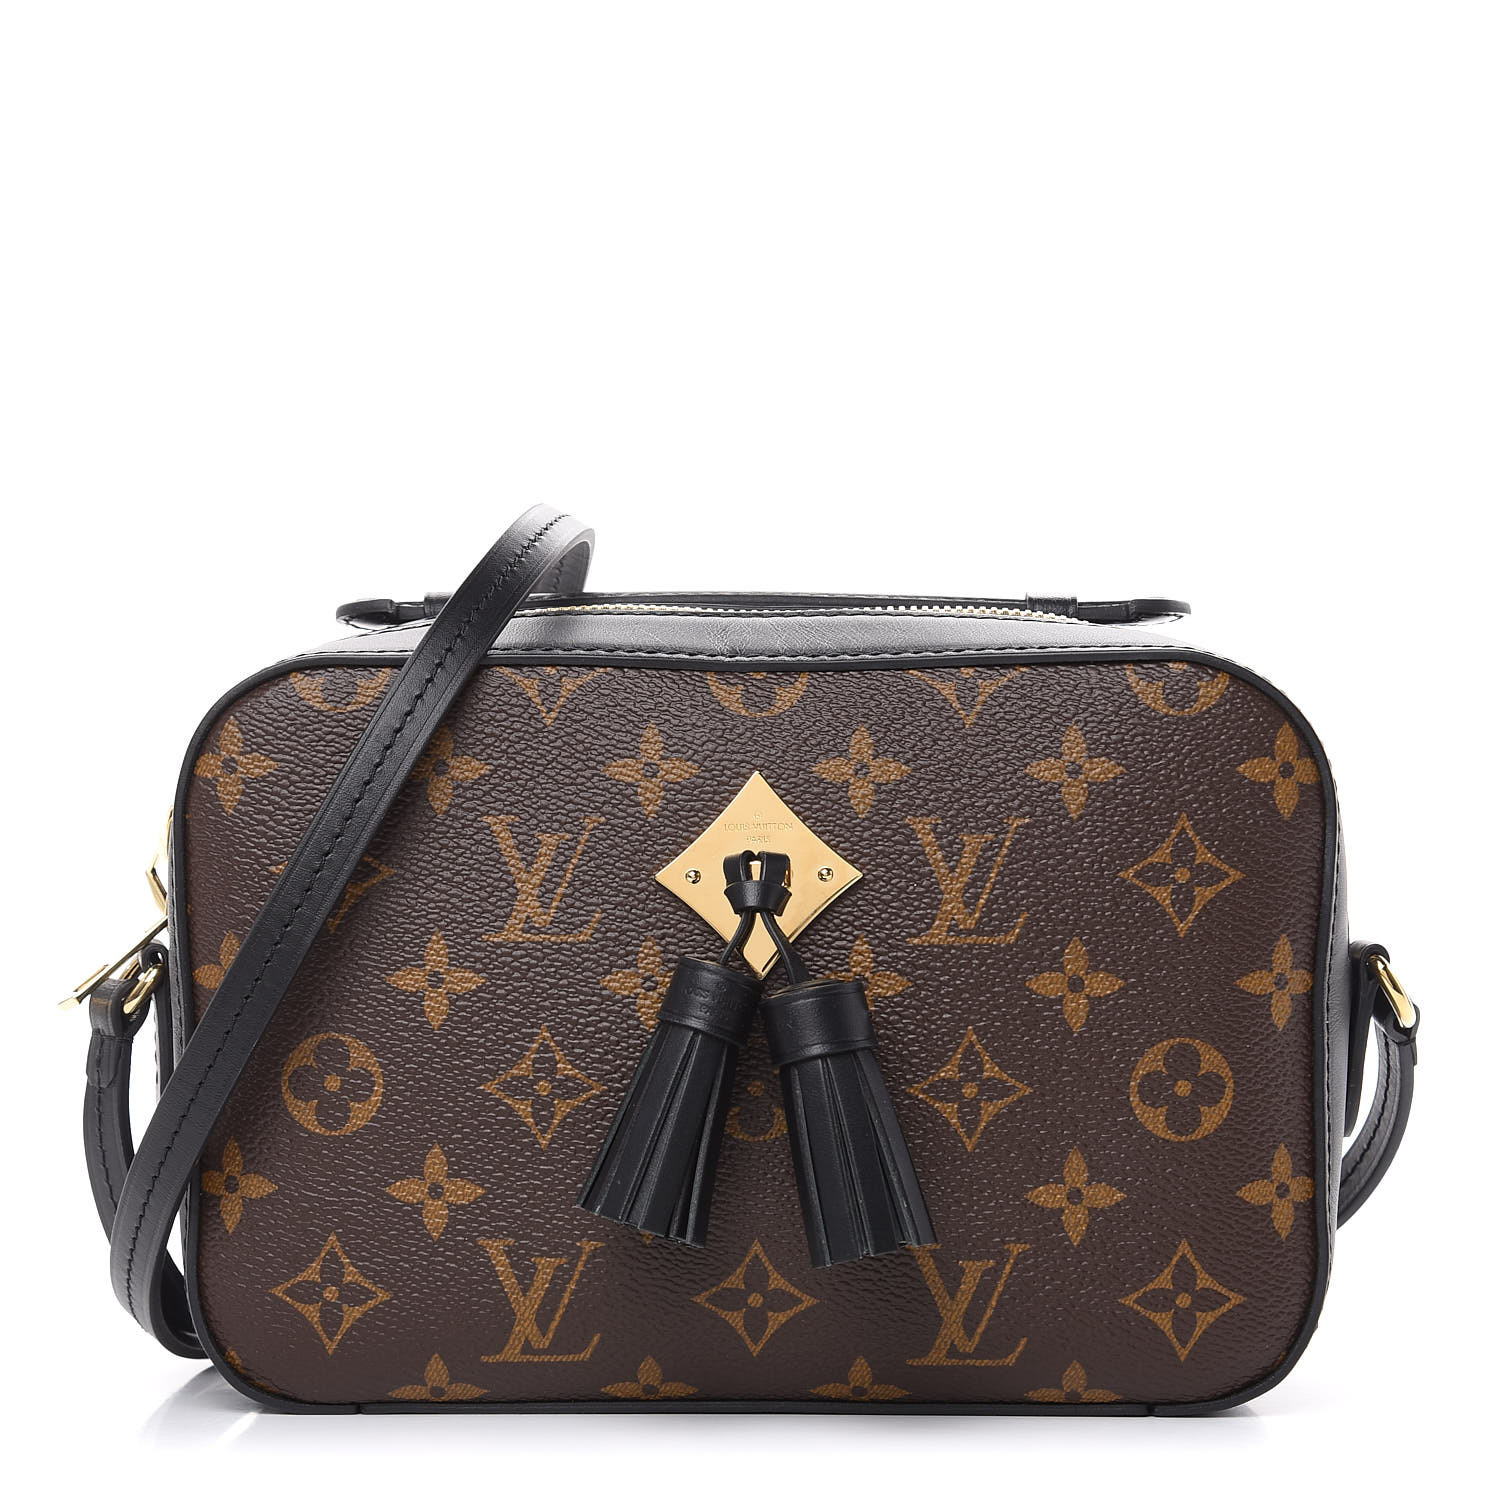 Louis Vuitton Like Bags  Natural Resource Department